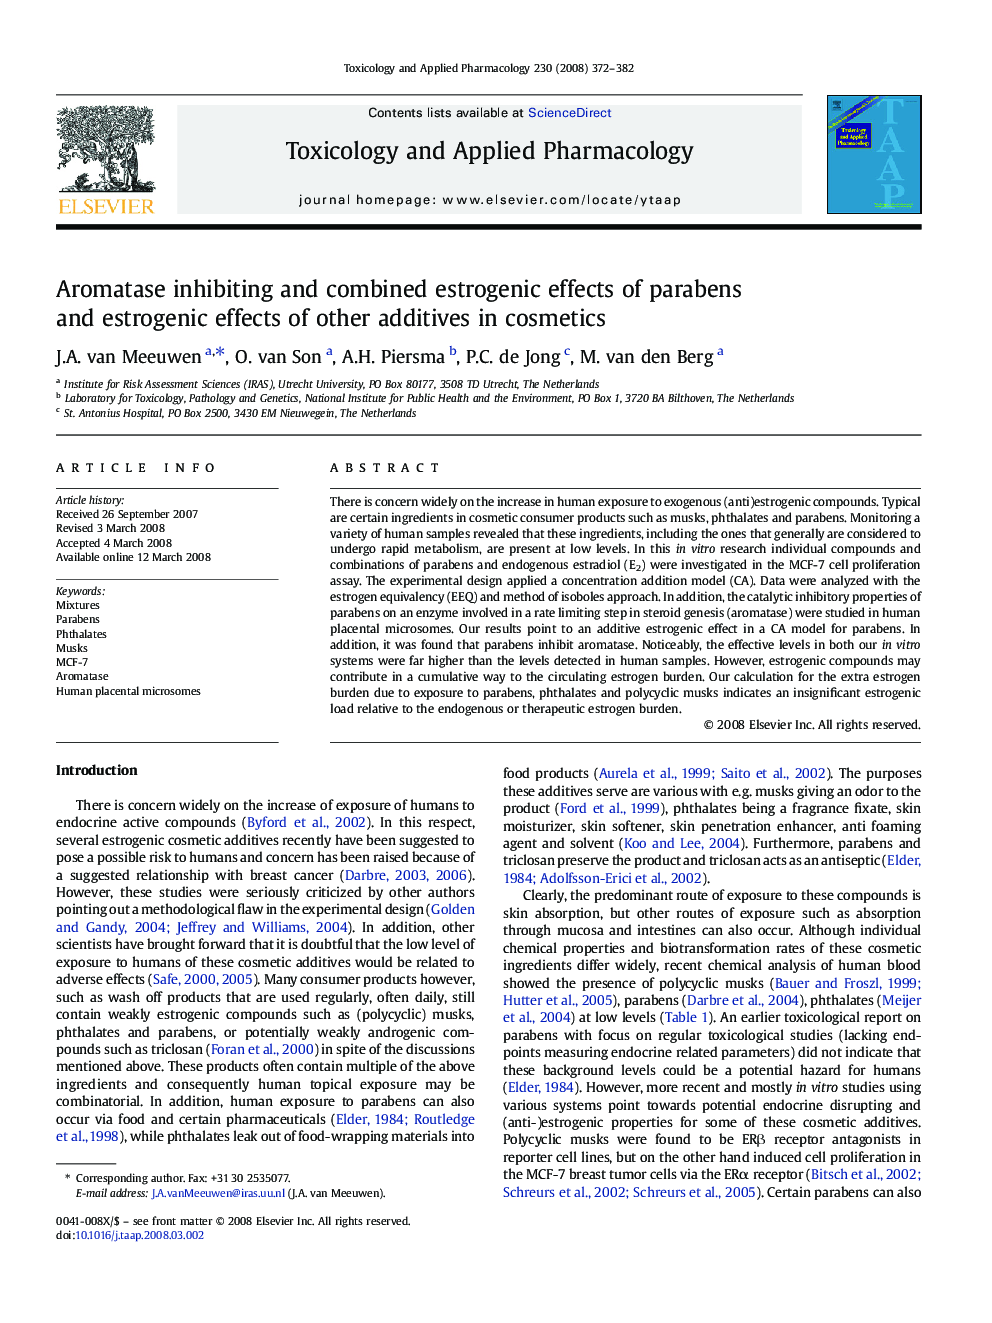 Aromatase inhibiting and combined estrogenic effects of parabens and estrogenic effects of other additives in cosmetics